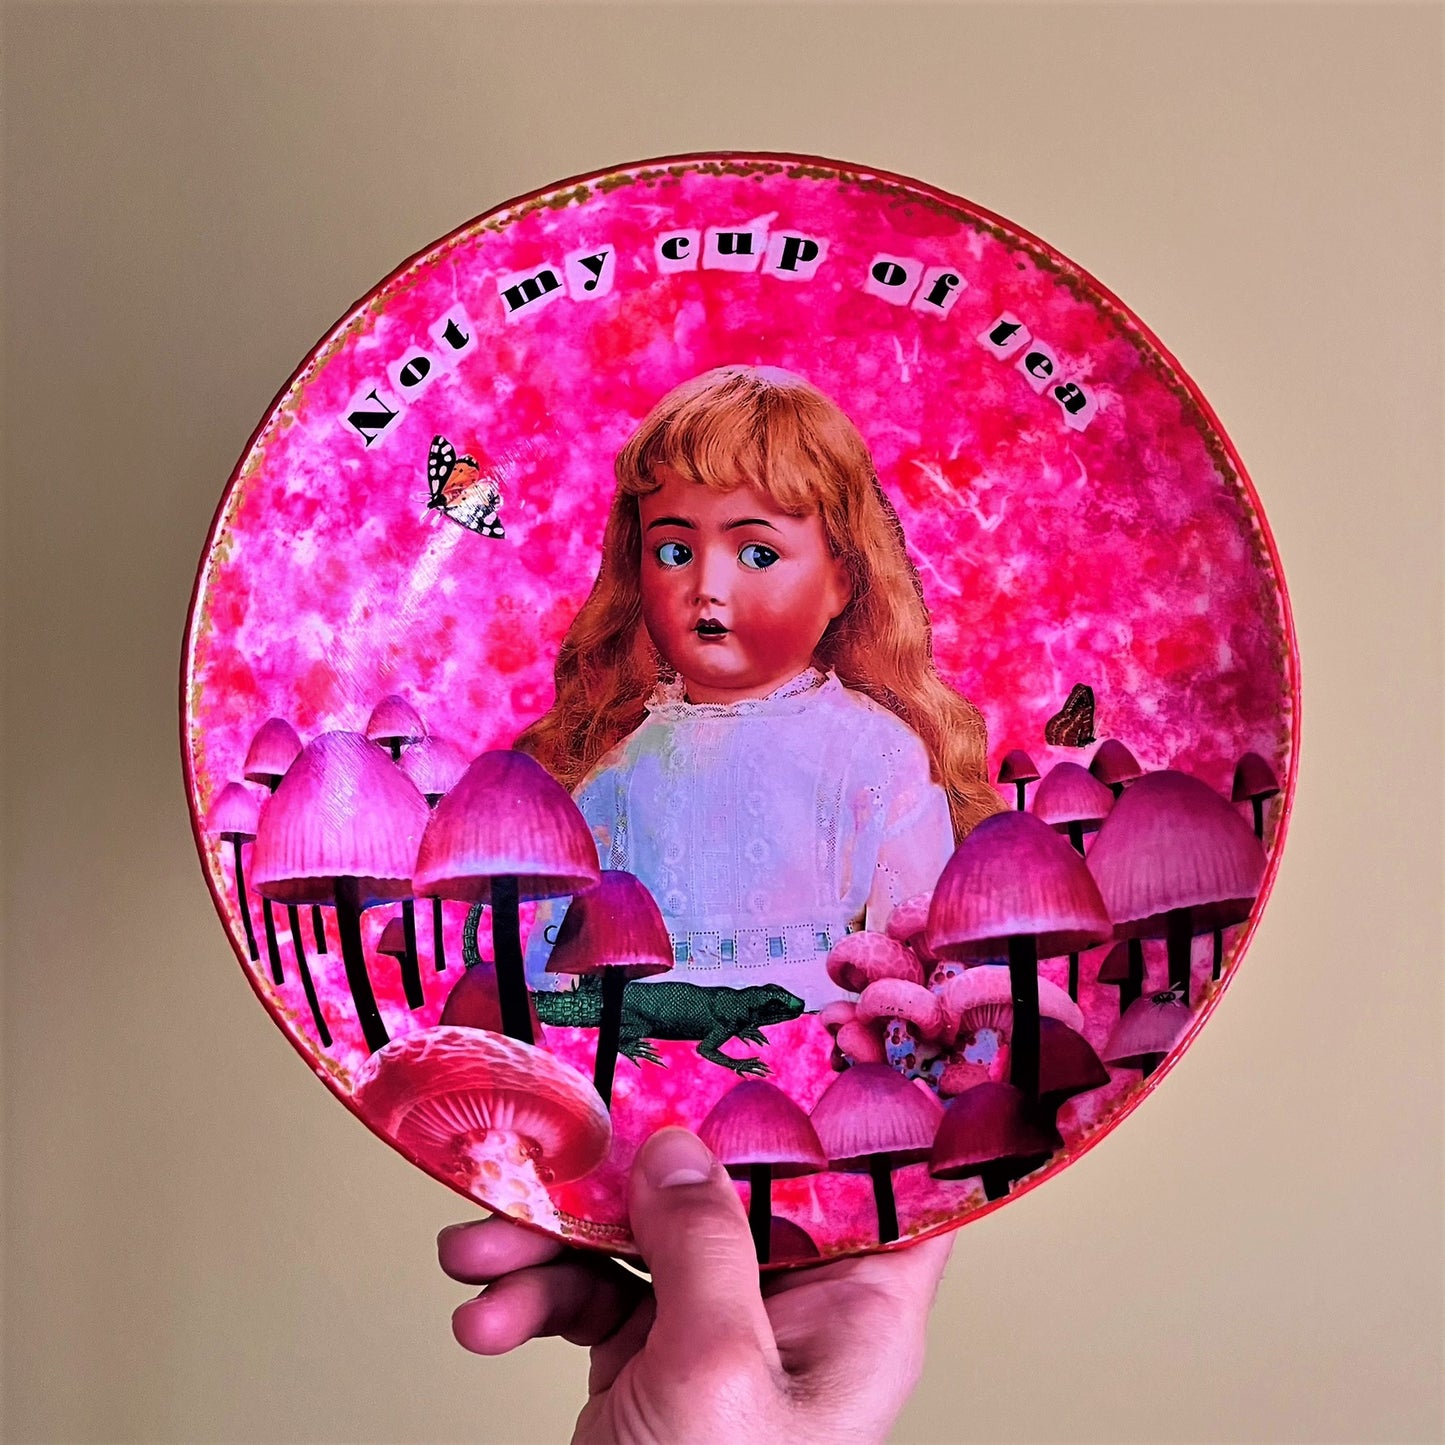 Pink Upcycled Wall Plate "Not My Cup Of Tea" - by House of Frisson